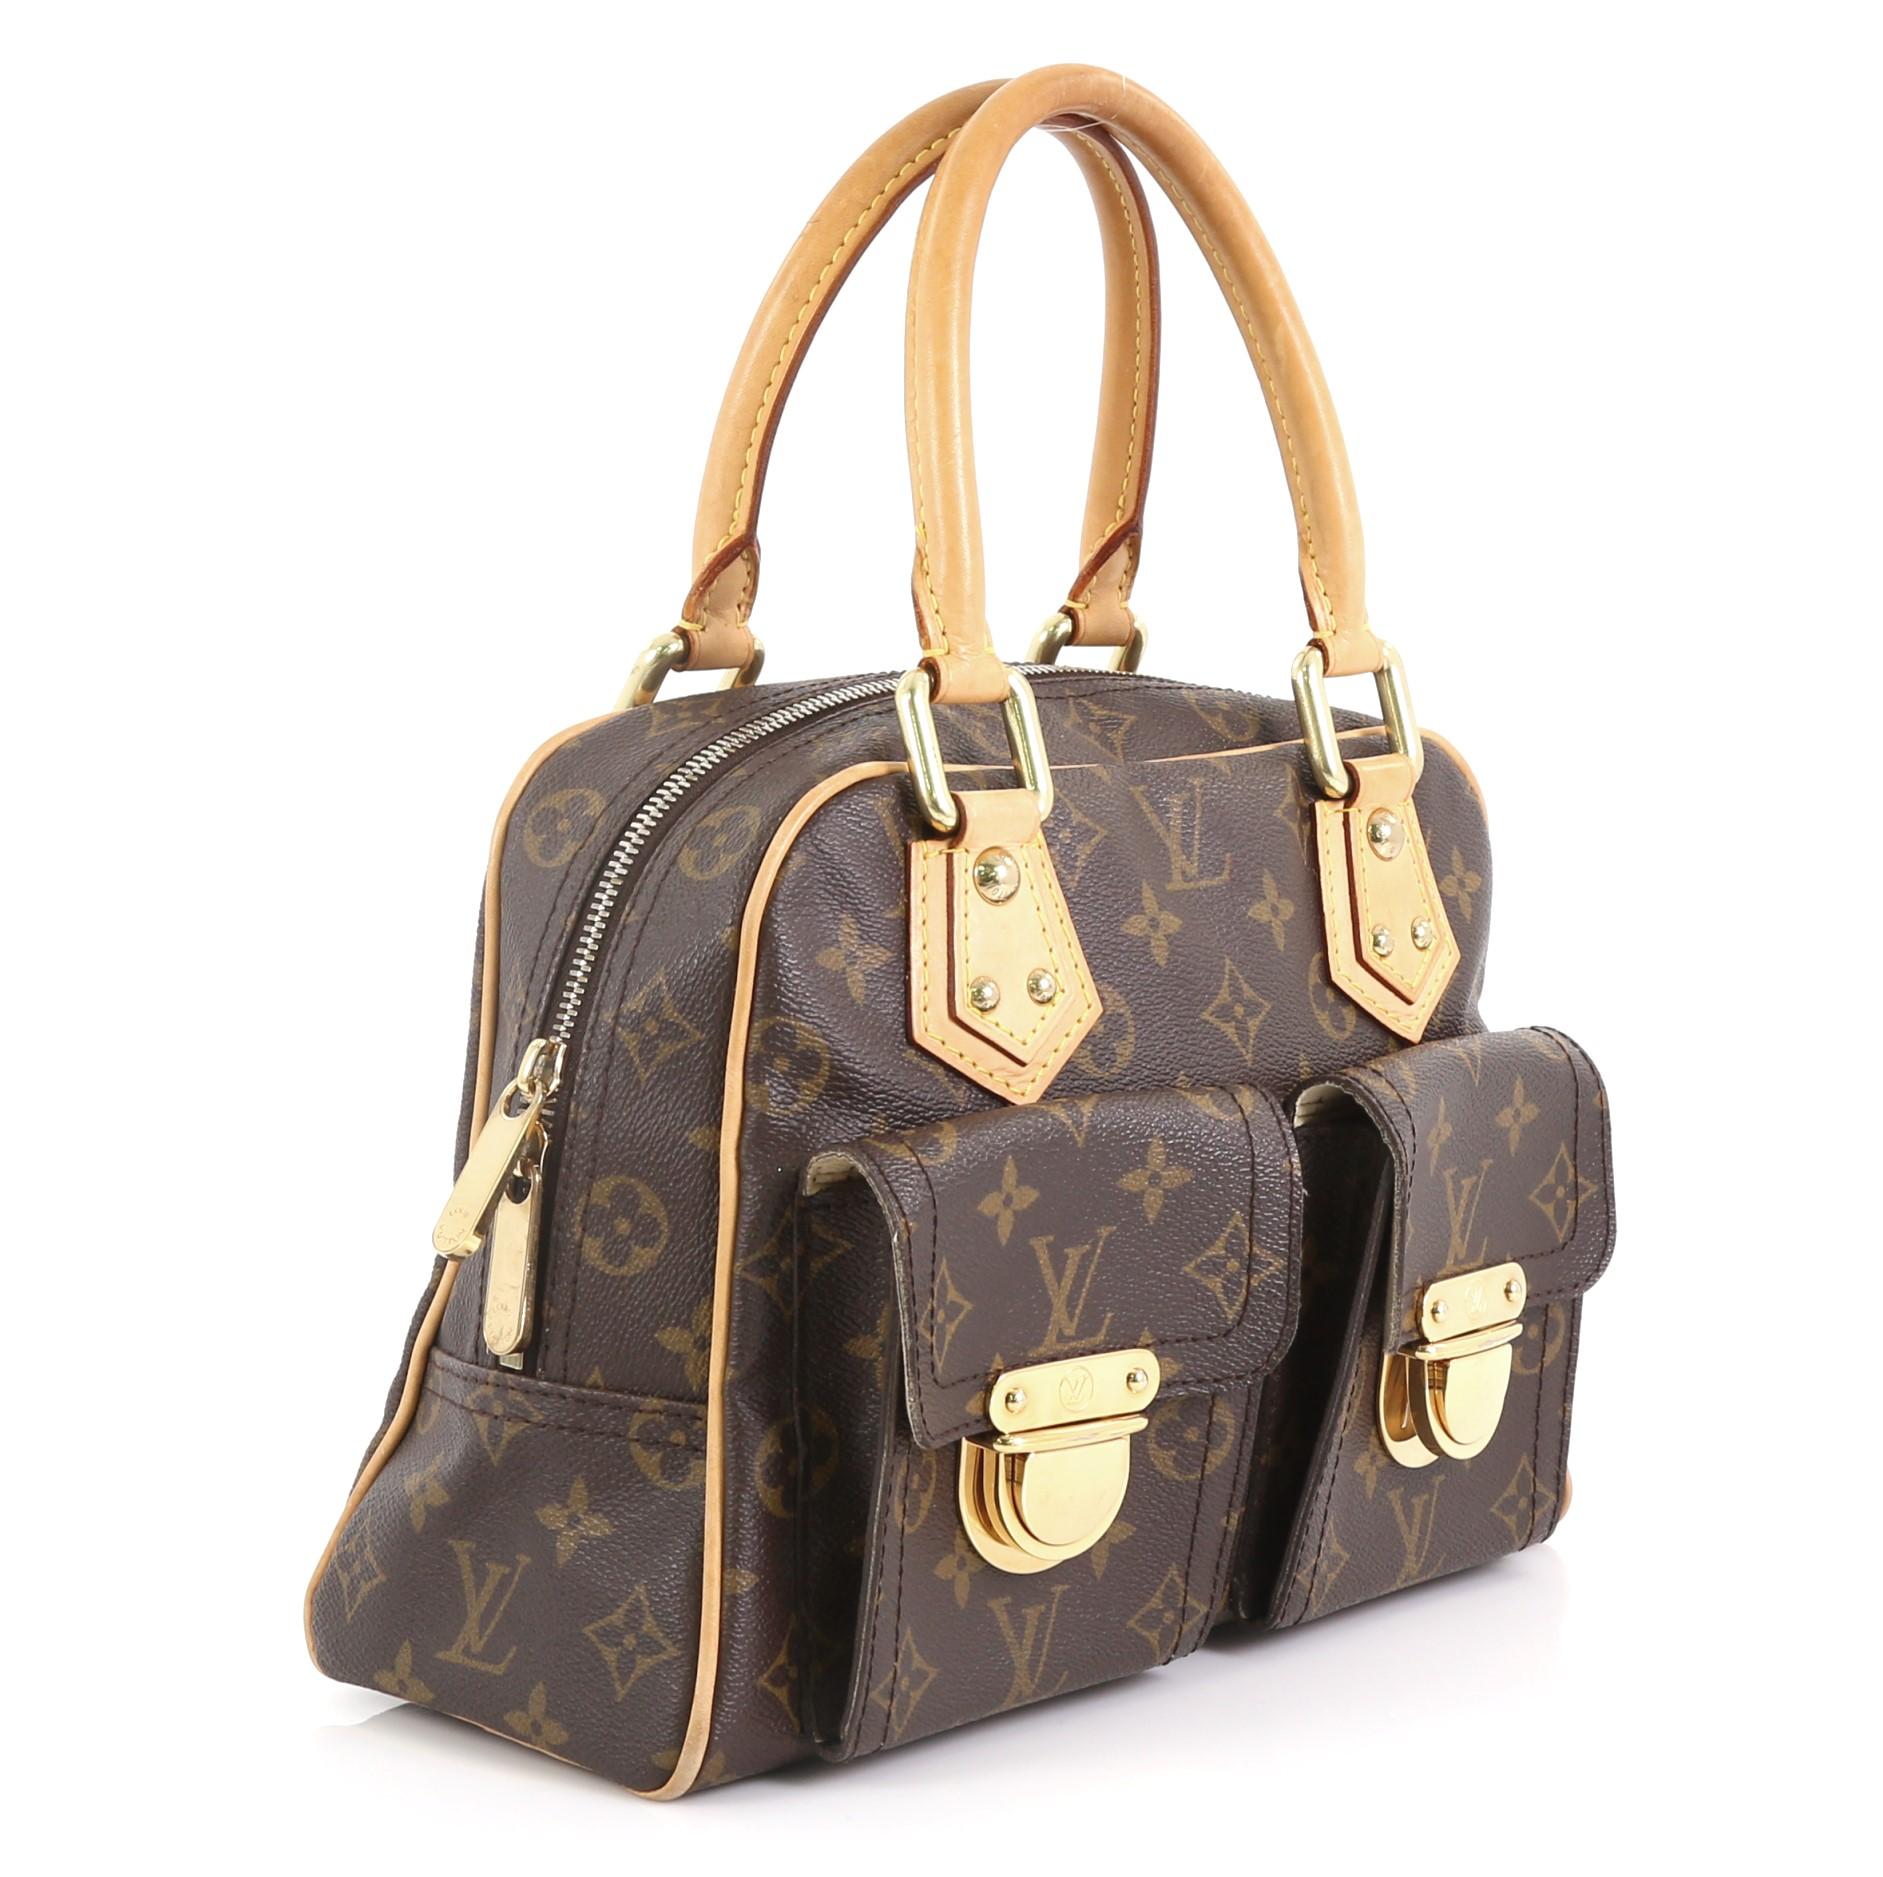 This Louis Vuitton Manhattan Handbag Monogram Canvas PM, crafted in brown monogram coated canvas, features dual rolled vachetta leather handles, front pockets with push-lock closure, and gold-tone hardware. Its zip closure opens to a neutral